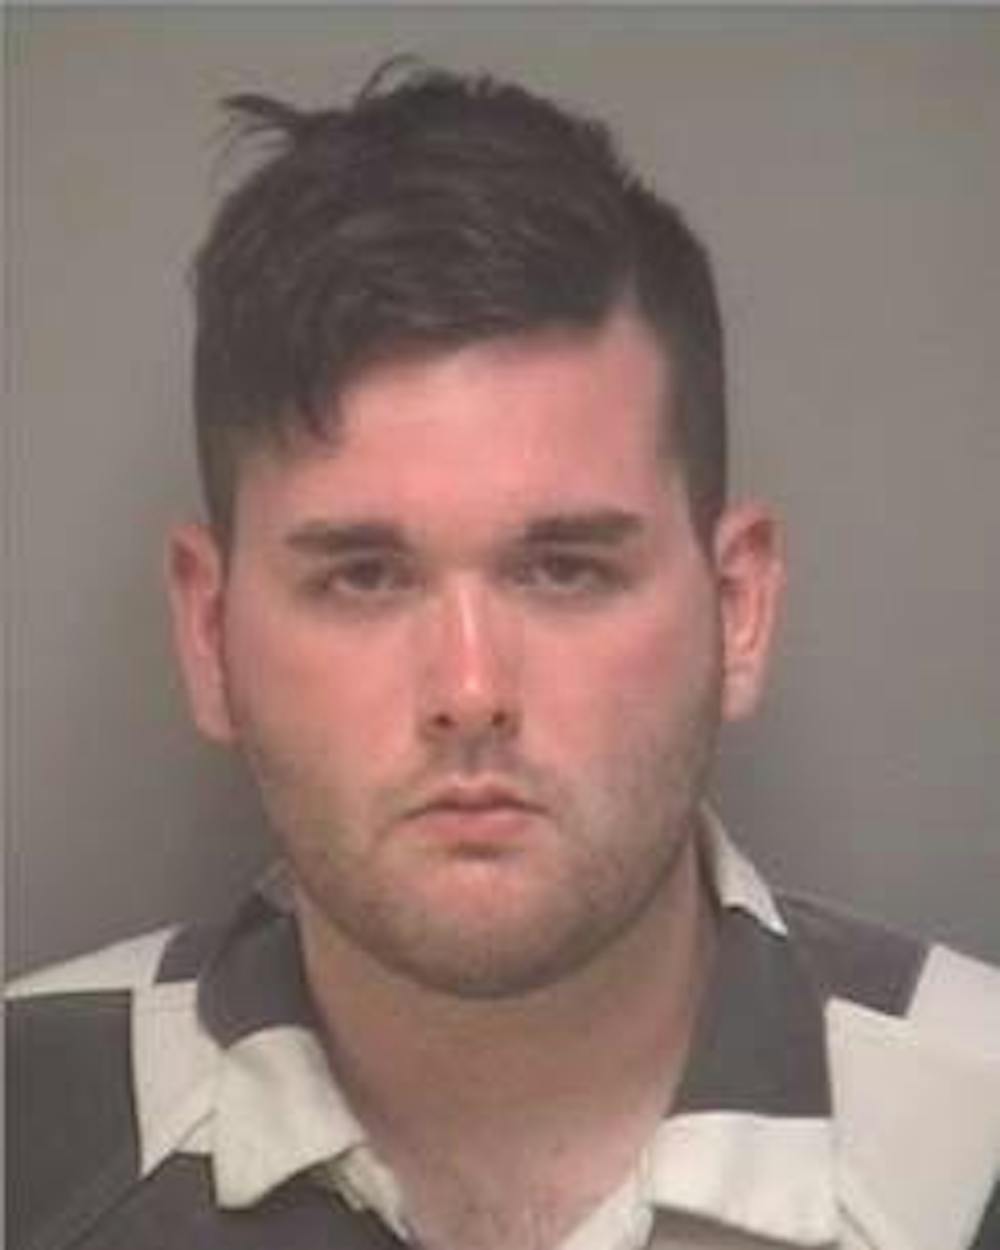 James Alex Fields Jr. admitted to driving his car into a crowd of counterprotesters at the Unite the Right rally in August 2017, killing one and injuring 35 others.